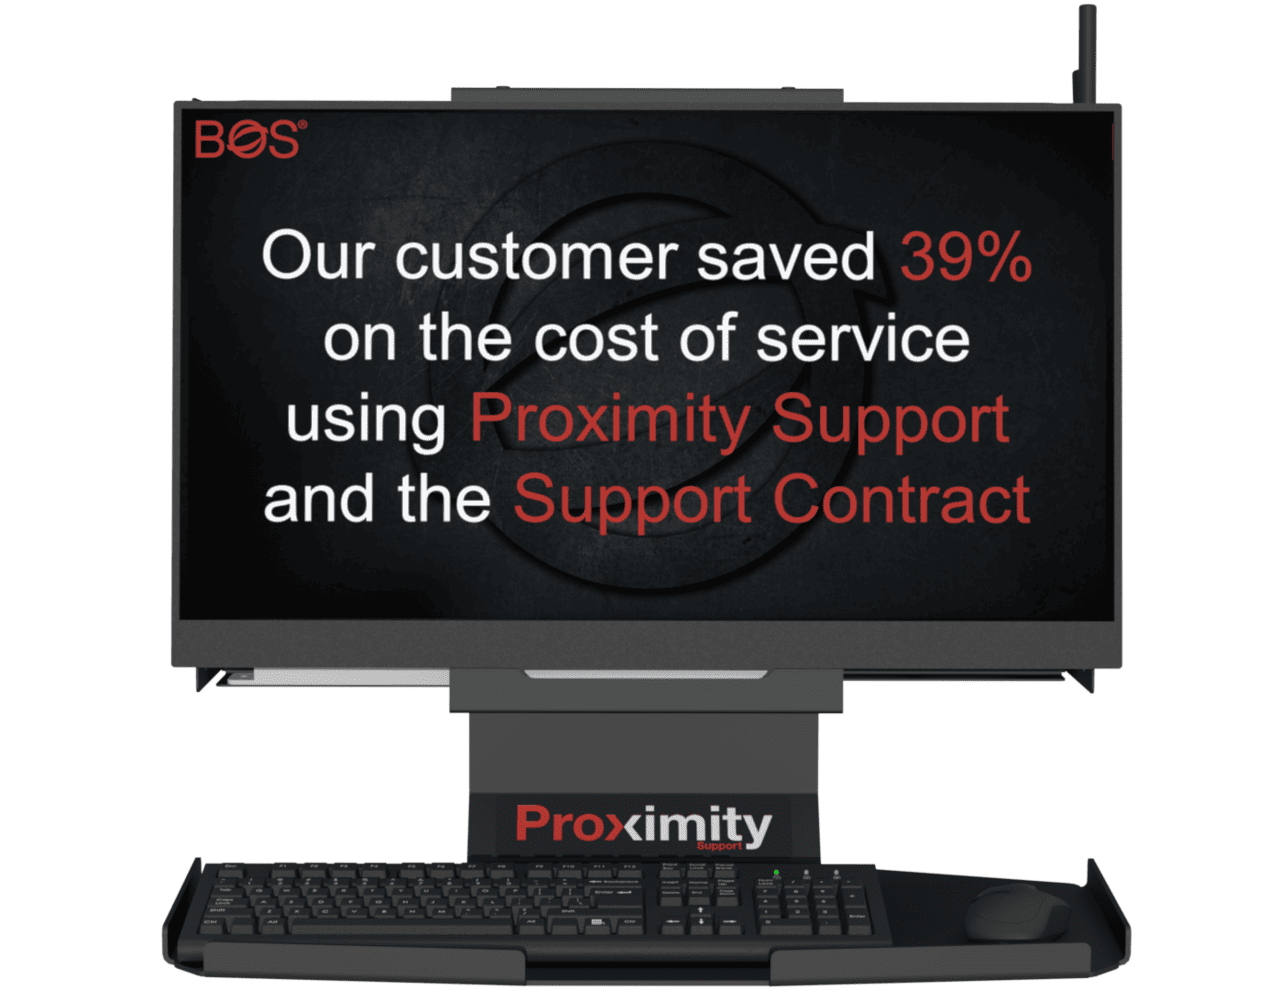 Proximity Support system displaying message: "Our customer saved 39% on the cost of service using Proximity Support and the Support Contract"